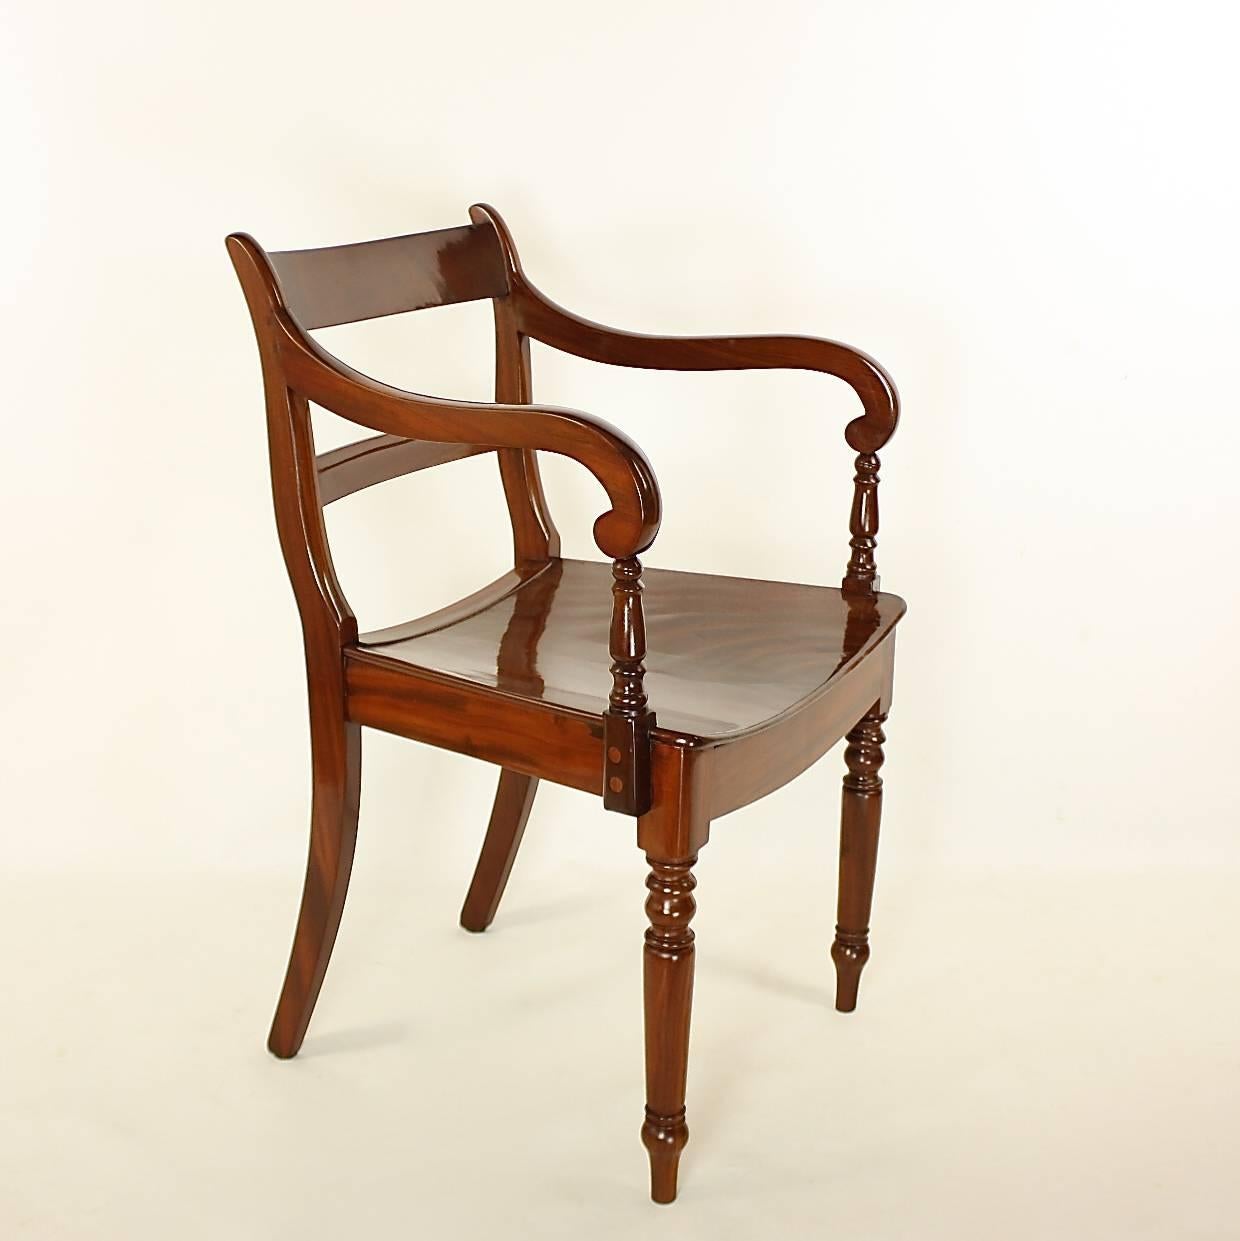 A pair of English Regency mahogany armchairs, the curved backs with top rails and horizontal splats below, with scroll arms on front ring-turned tapered legs and sabre back legs. The seats not upholstered but shaped for seating. The pair in